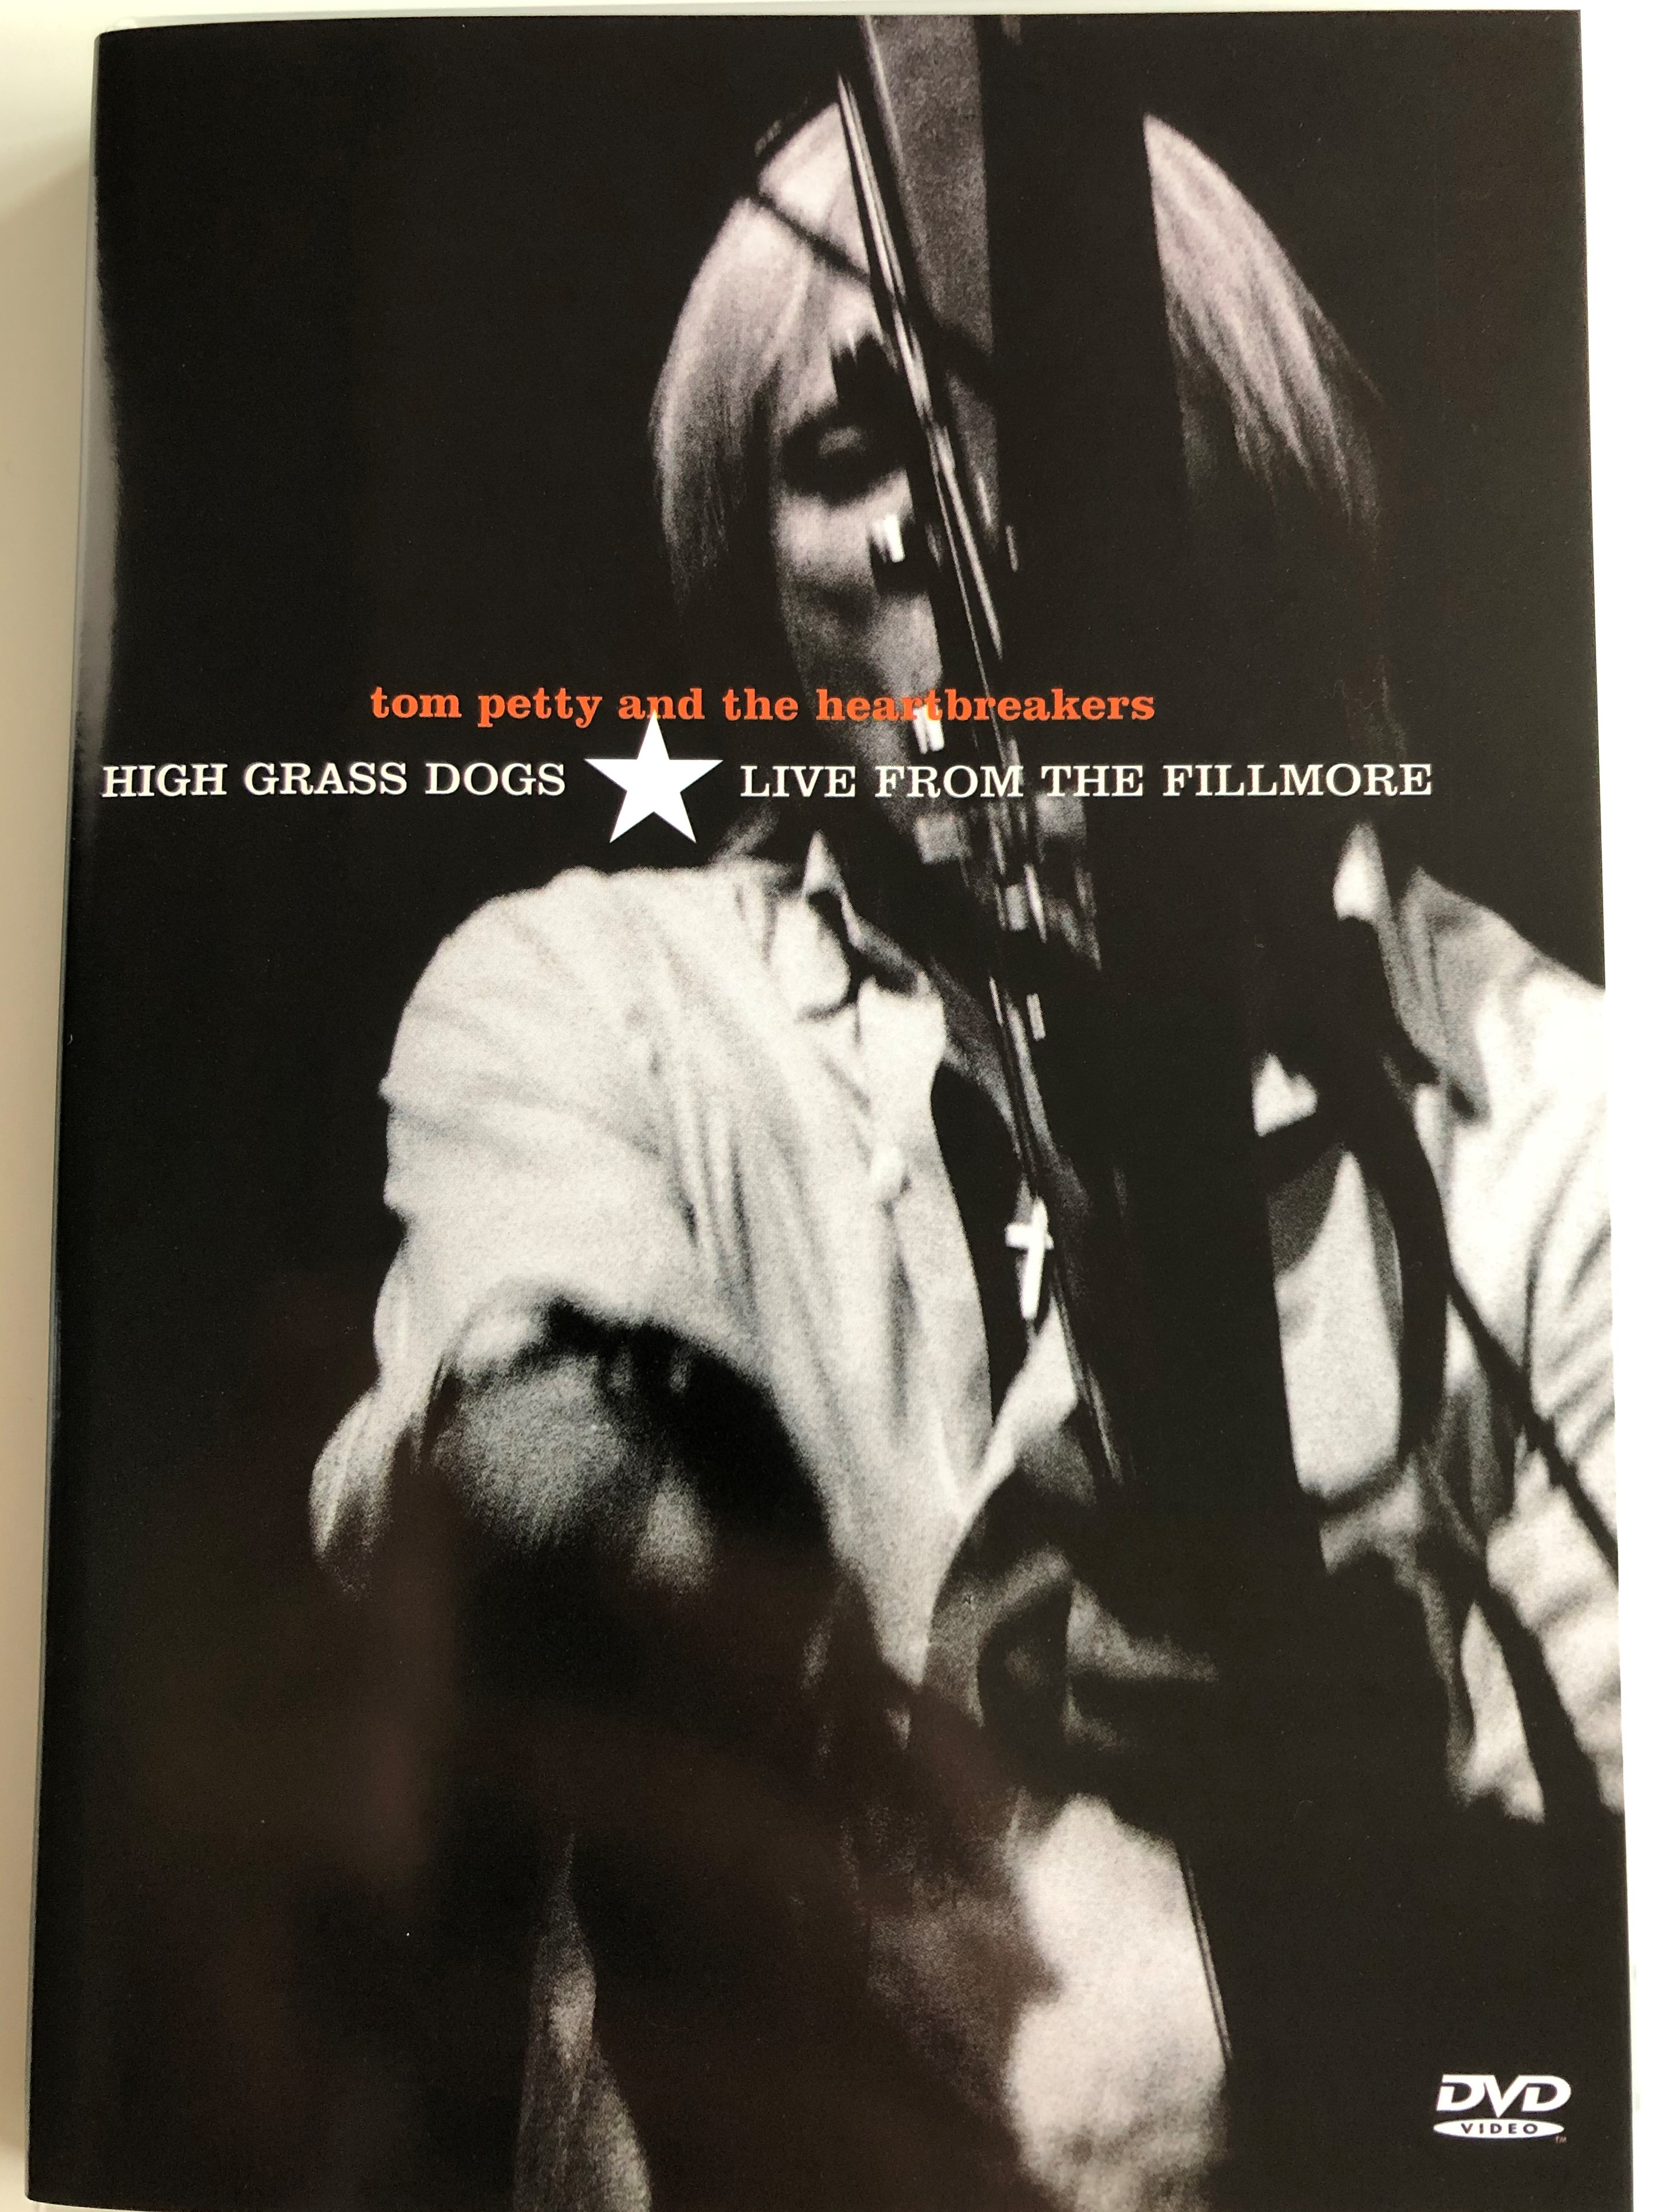 tom-petty-and-the-heartbreakers-high-grass-dogs-dvd-1999-live-from-the-fillmore-1.jpg